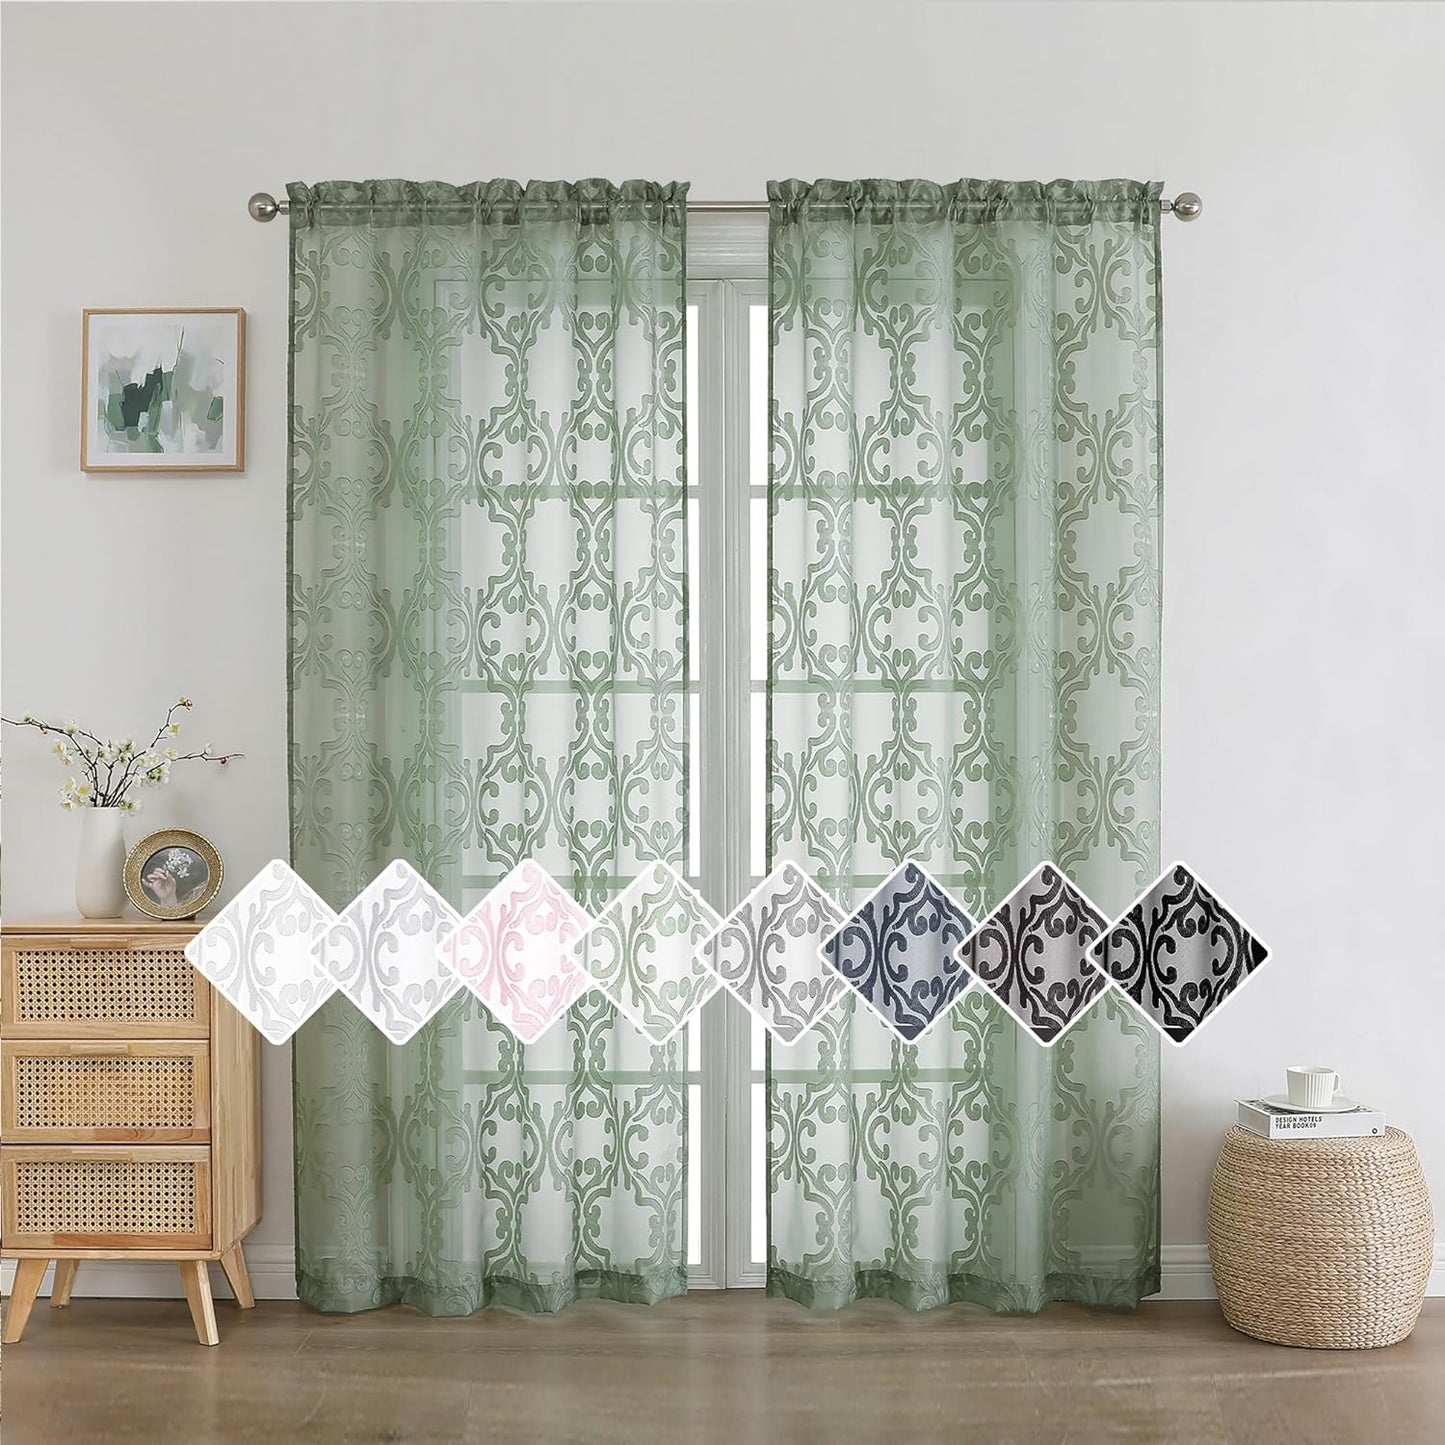 Aiyufeng Suri 2 Panels Sheer Sage Green Curtains 63 Inches Long, Light & Airy Privacy Textured Sheer Drapes, Dual Rod Pocket Voile Clipped Floral Luxury Panels for Bedroom Living Room, 42 X 63 Inch  Aiyufeng Sage Green 2X42X72" 